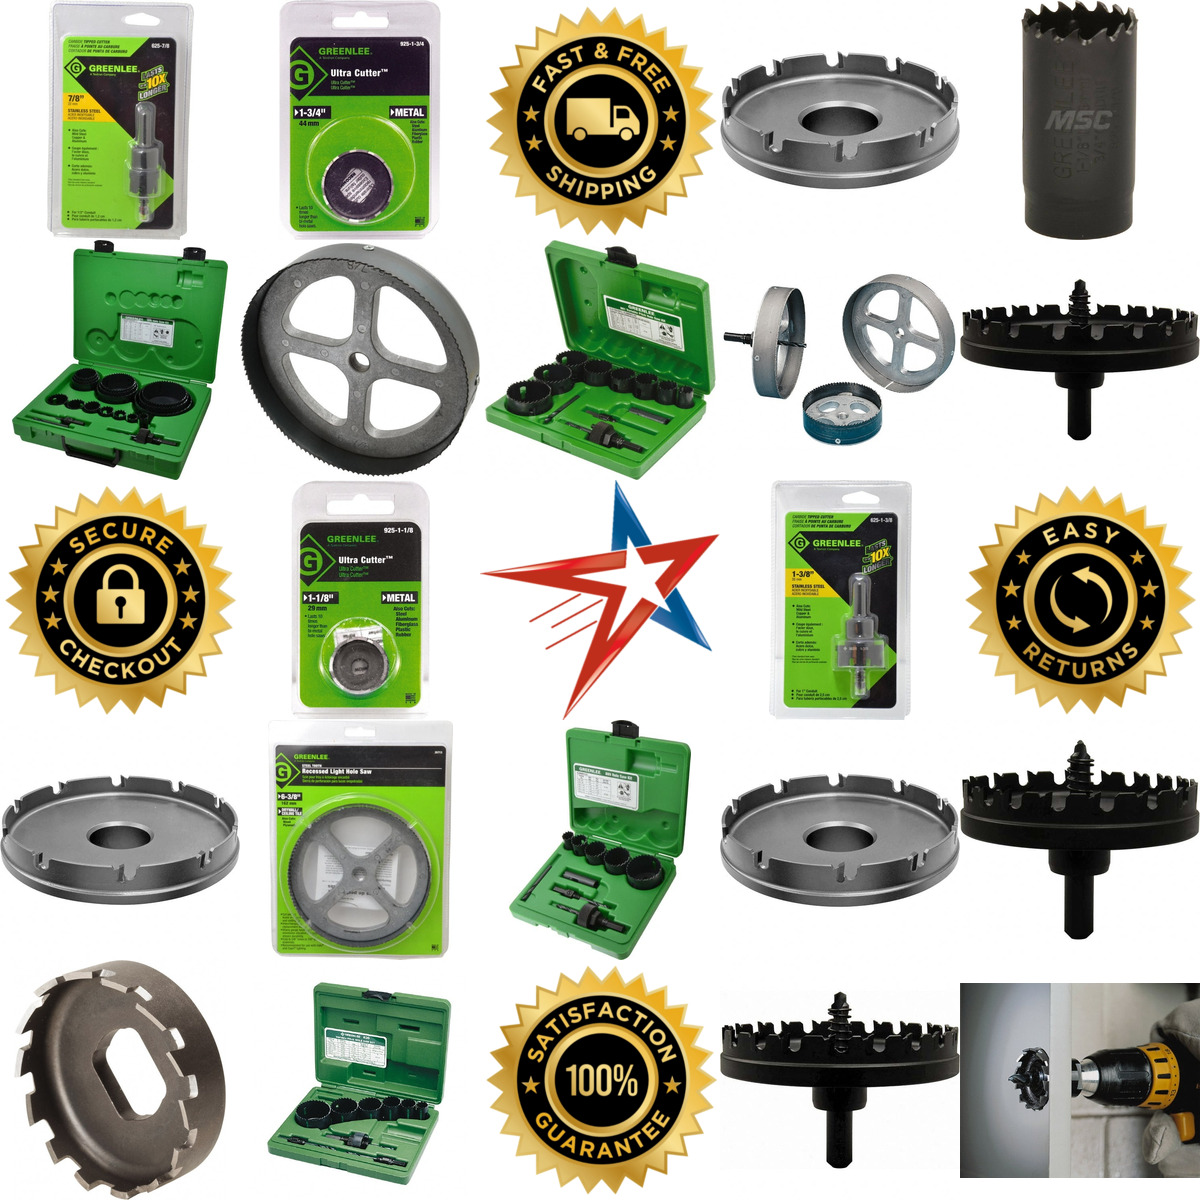 A selection of Greenlee products on GoVets